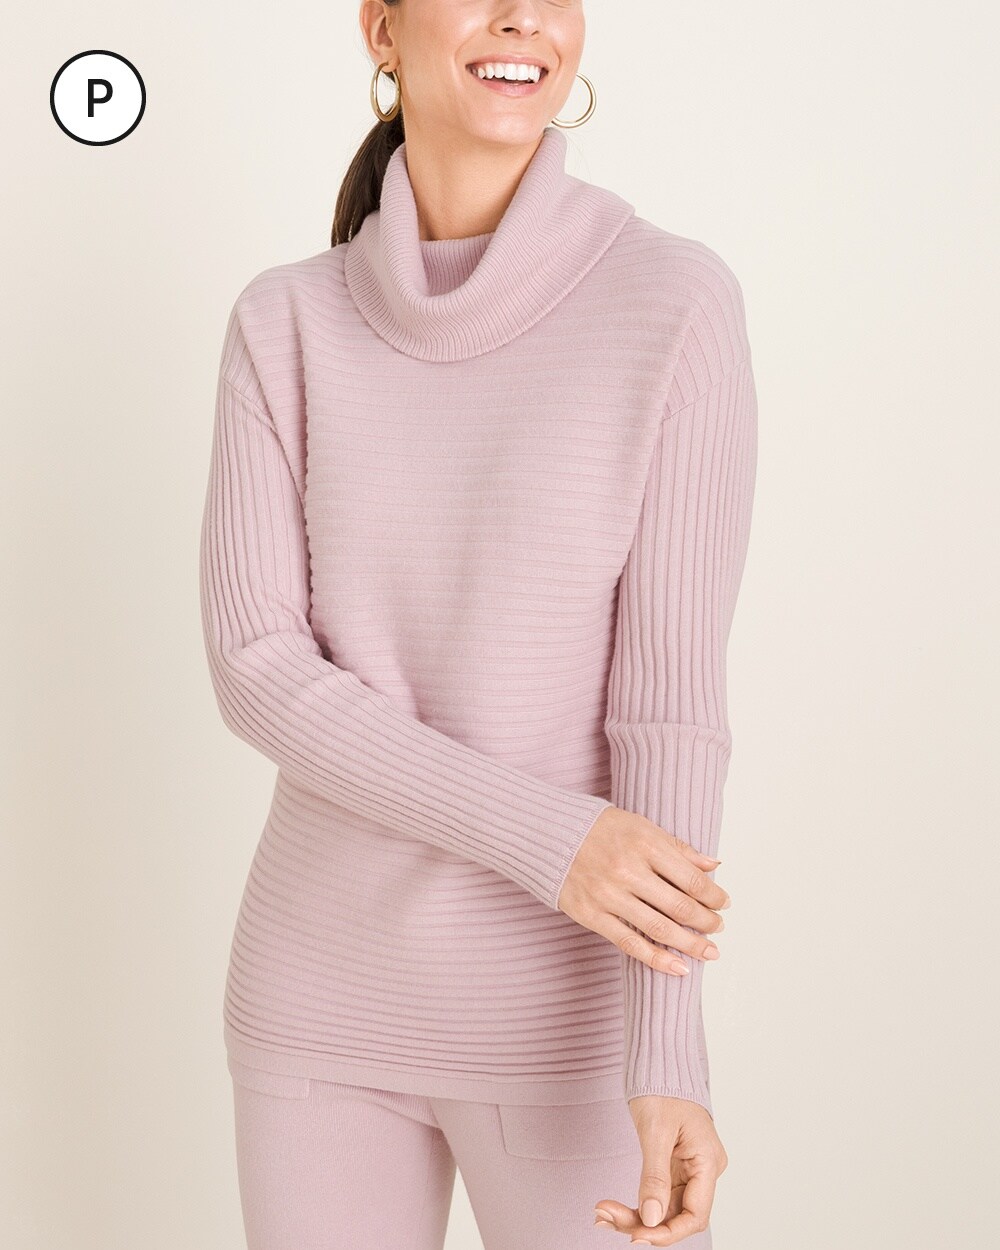 Zenergy Petite Cotton-Cashmere Blend Cozy Ribbed Sweater